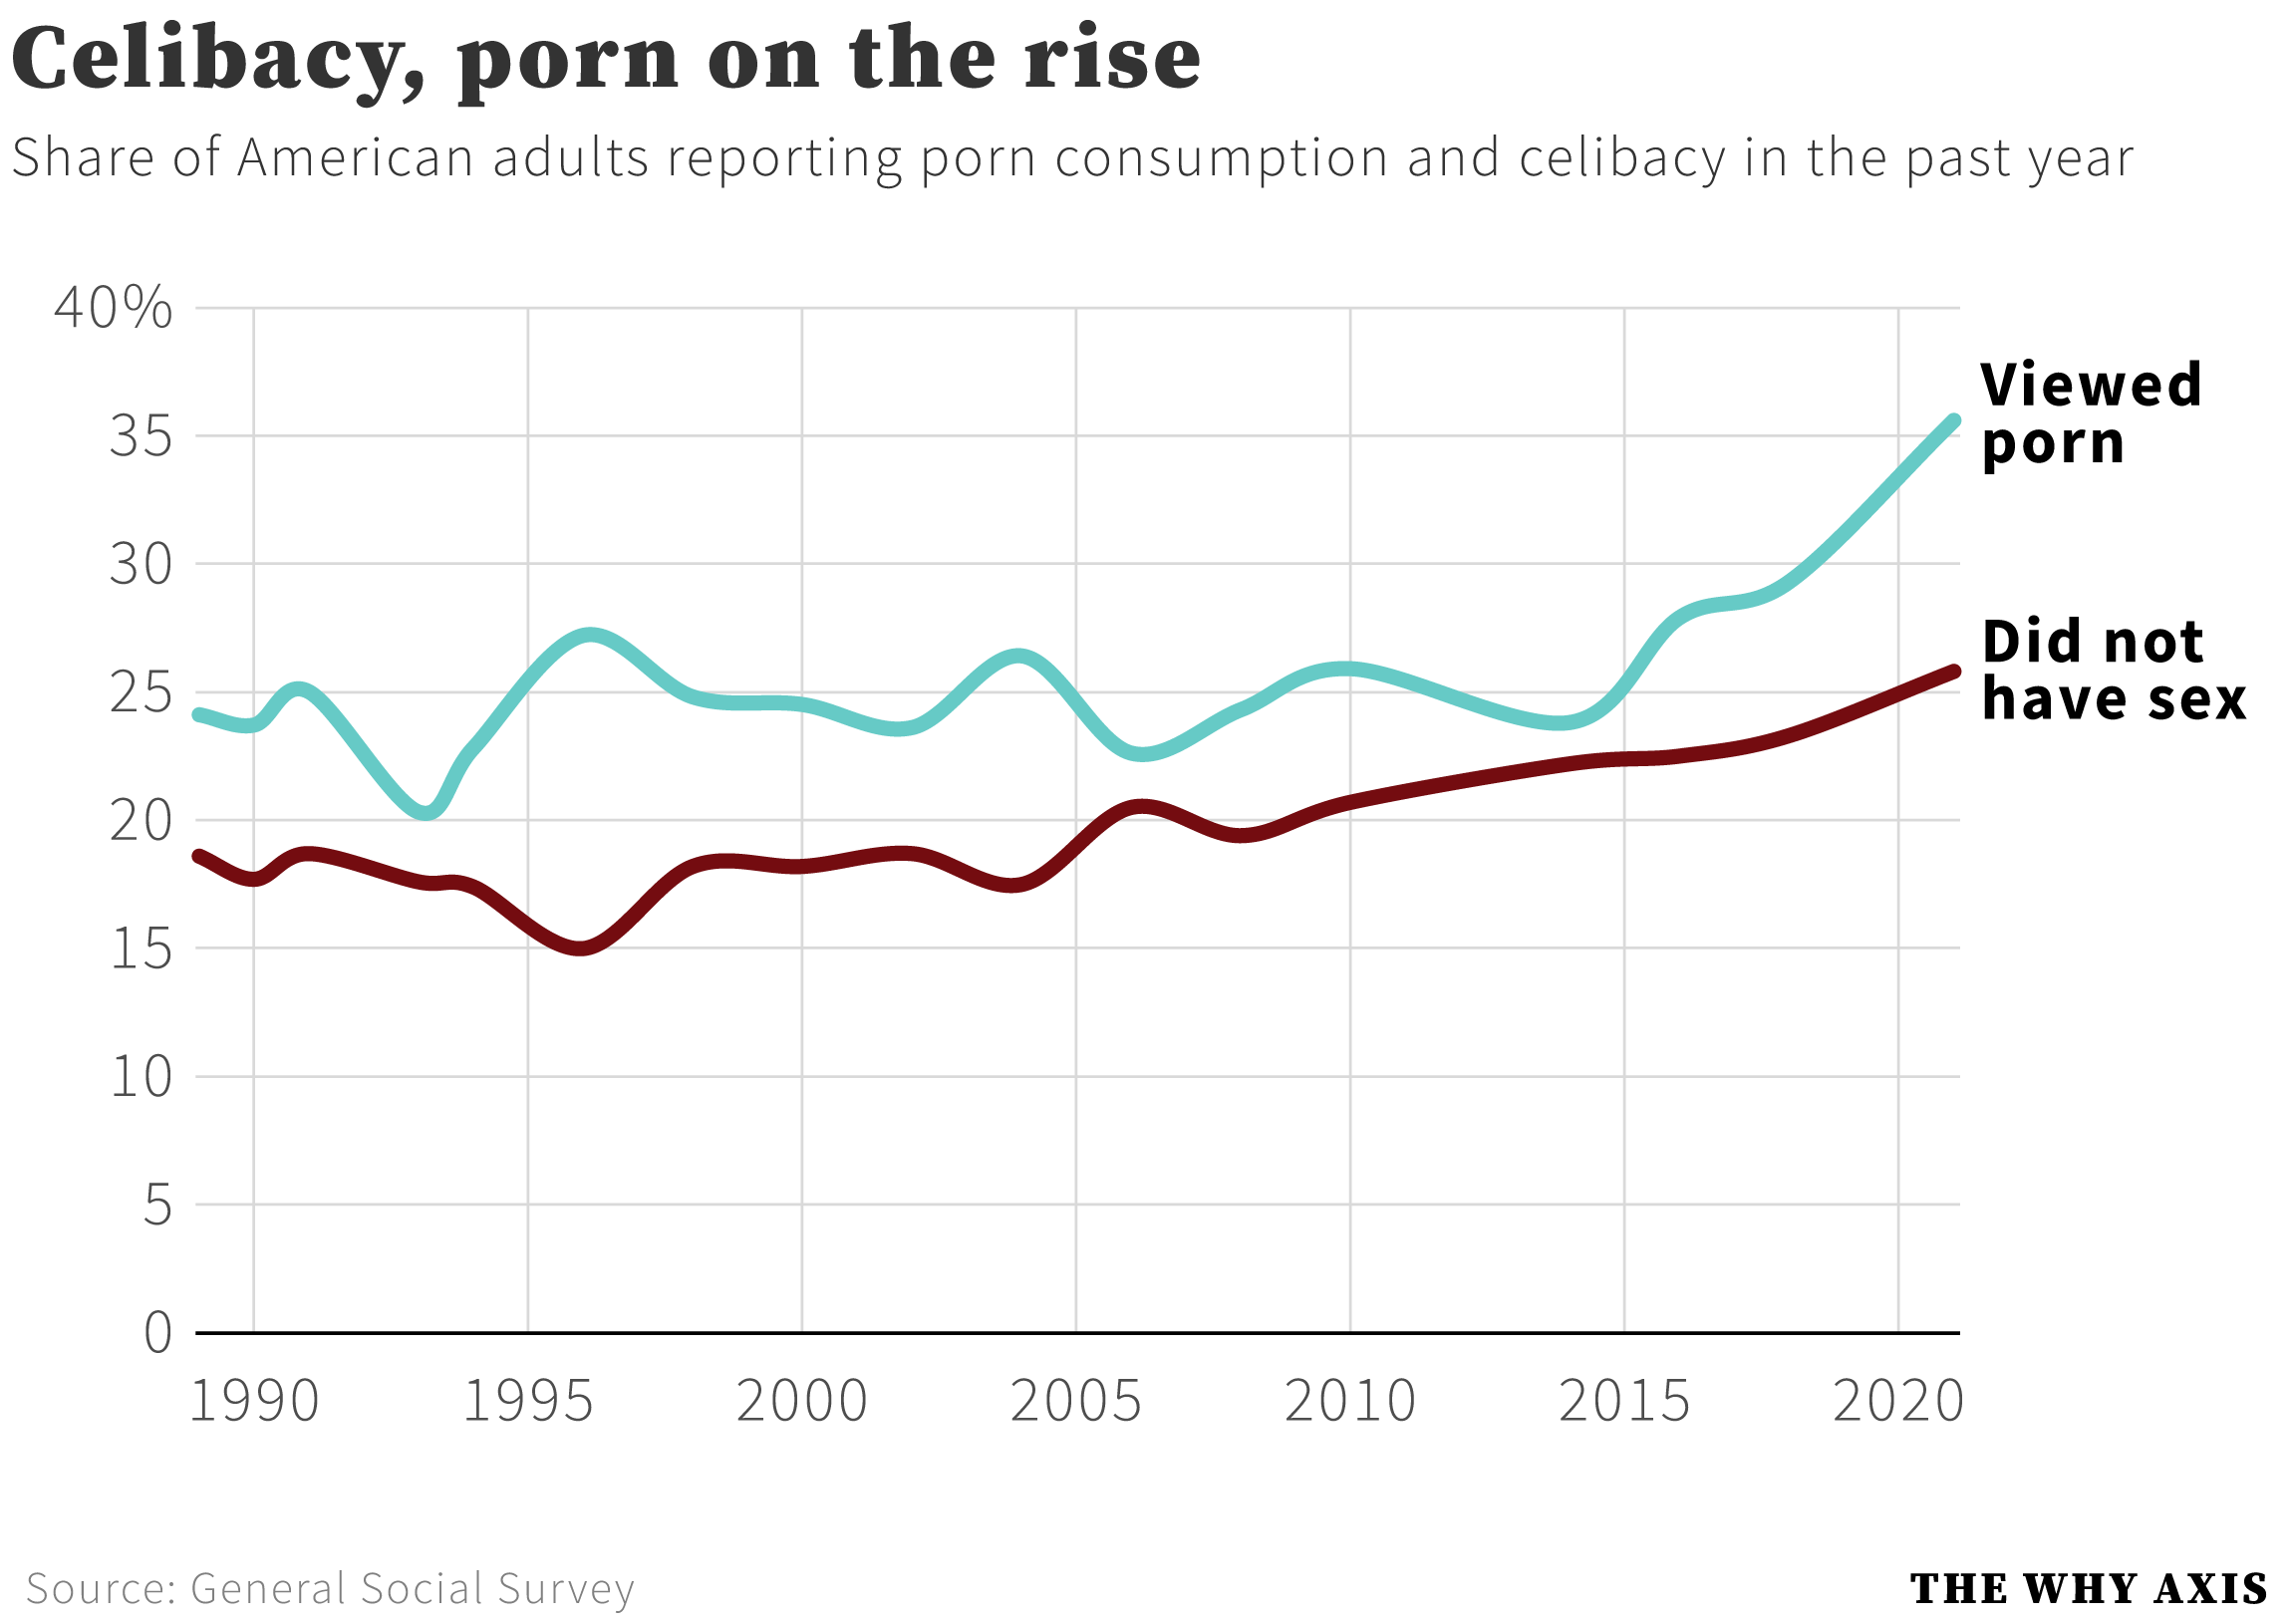 More porn, less sex how the pandemic scrambled American intimacy